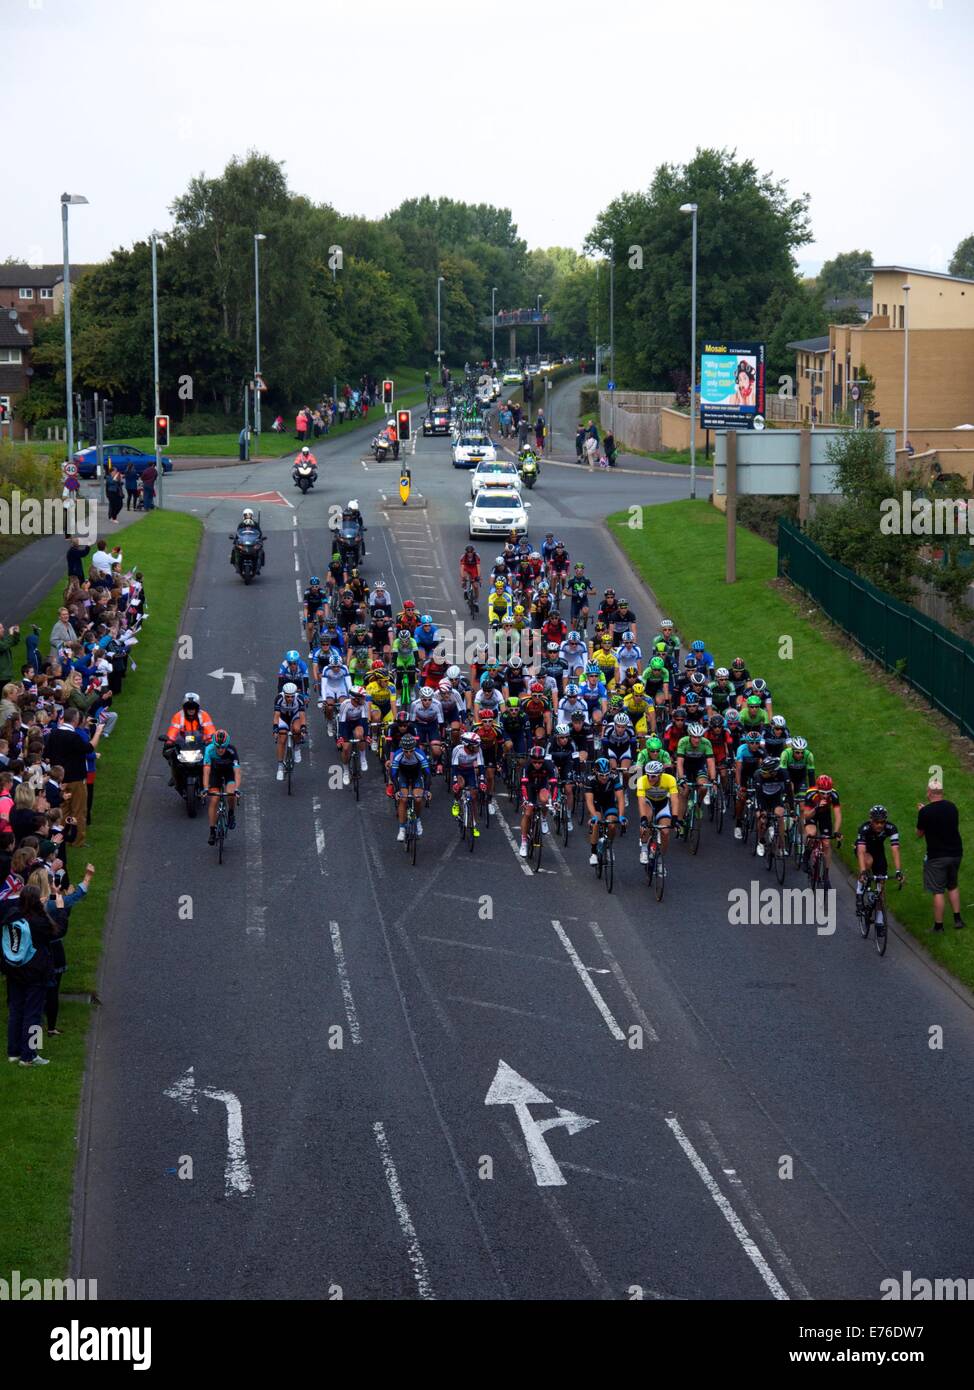 Runcorn, Halton, Cheshire, UK. 8th September, 2014. Stage 2 of the Tour of Britain passing through Runcorn, Halton on their way to finish in Llandudno, North Wales. Credit:  Dave Baxter/Alamy Live News Stock Photo